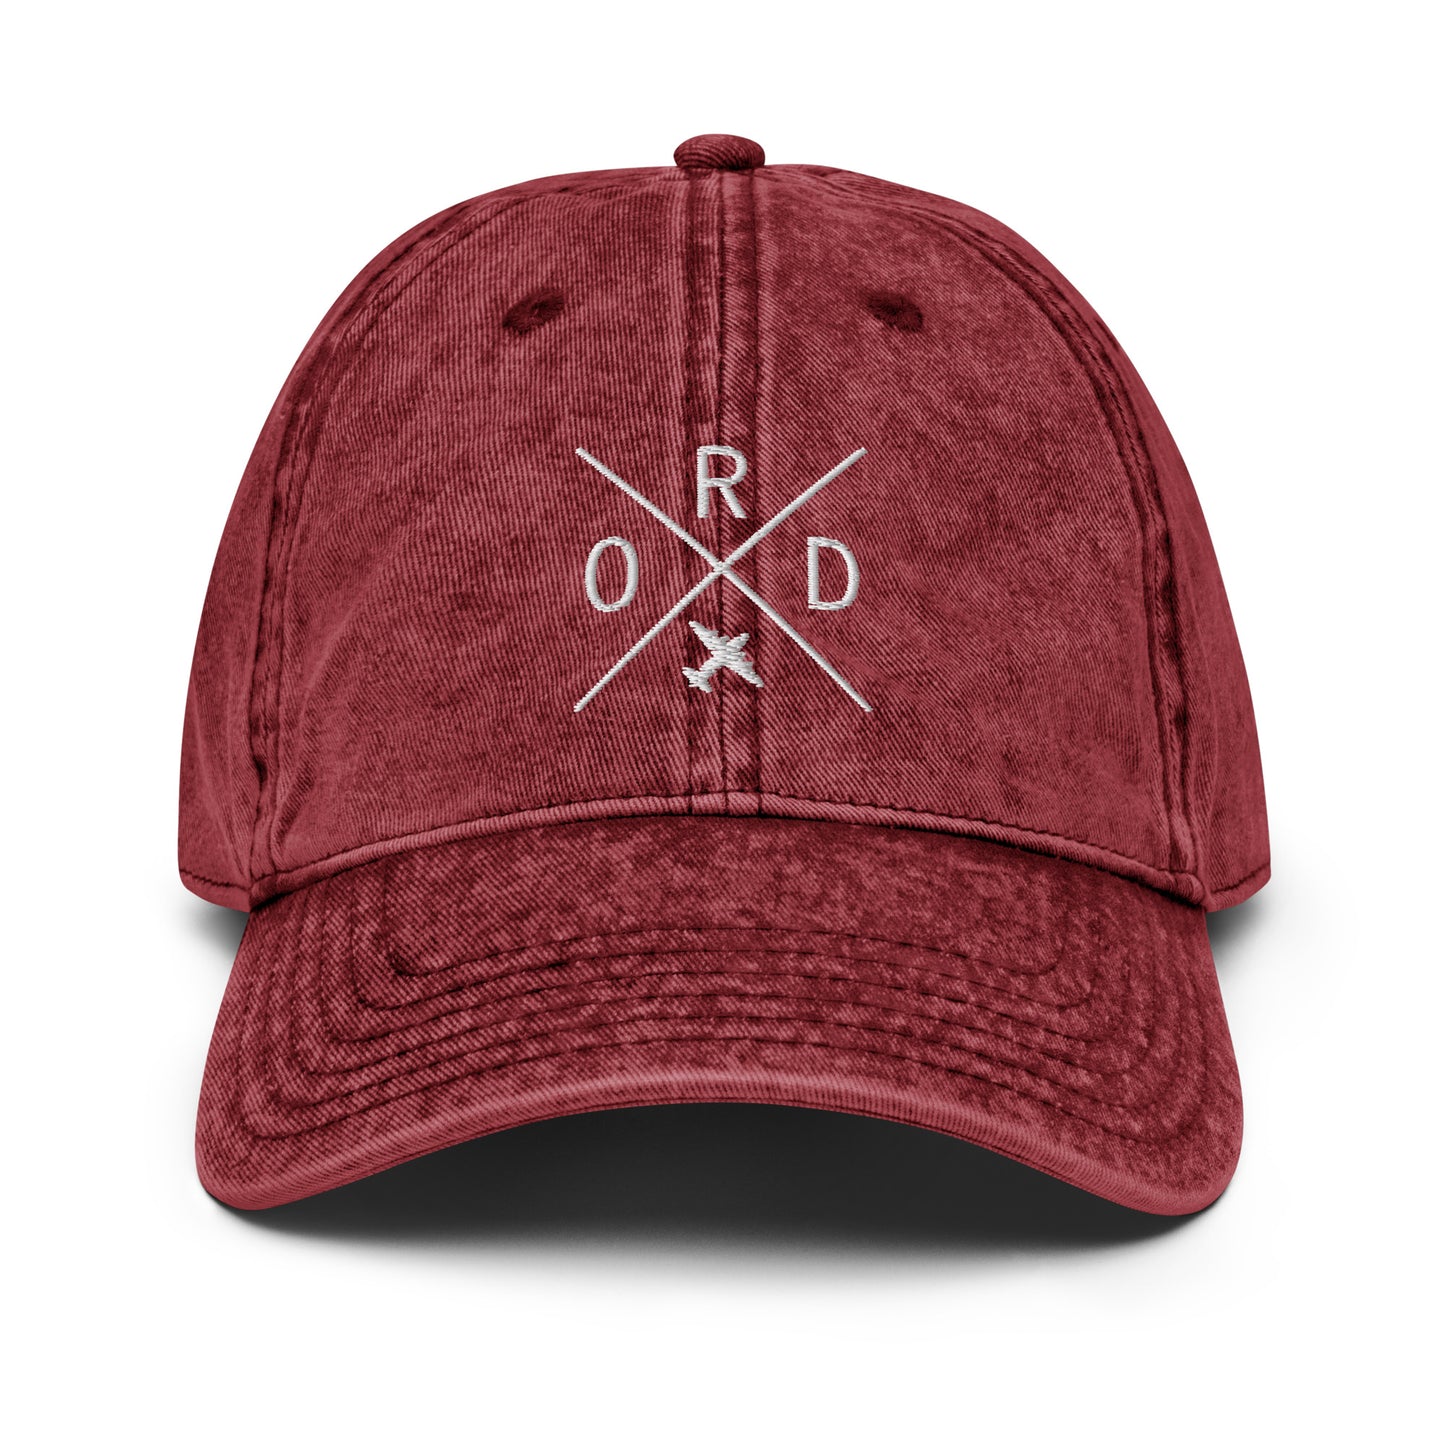 Crossed-X Cotton Twill Cap - White • ORD Chicago • YHM Designs - Image 22